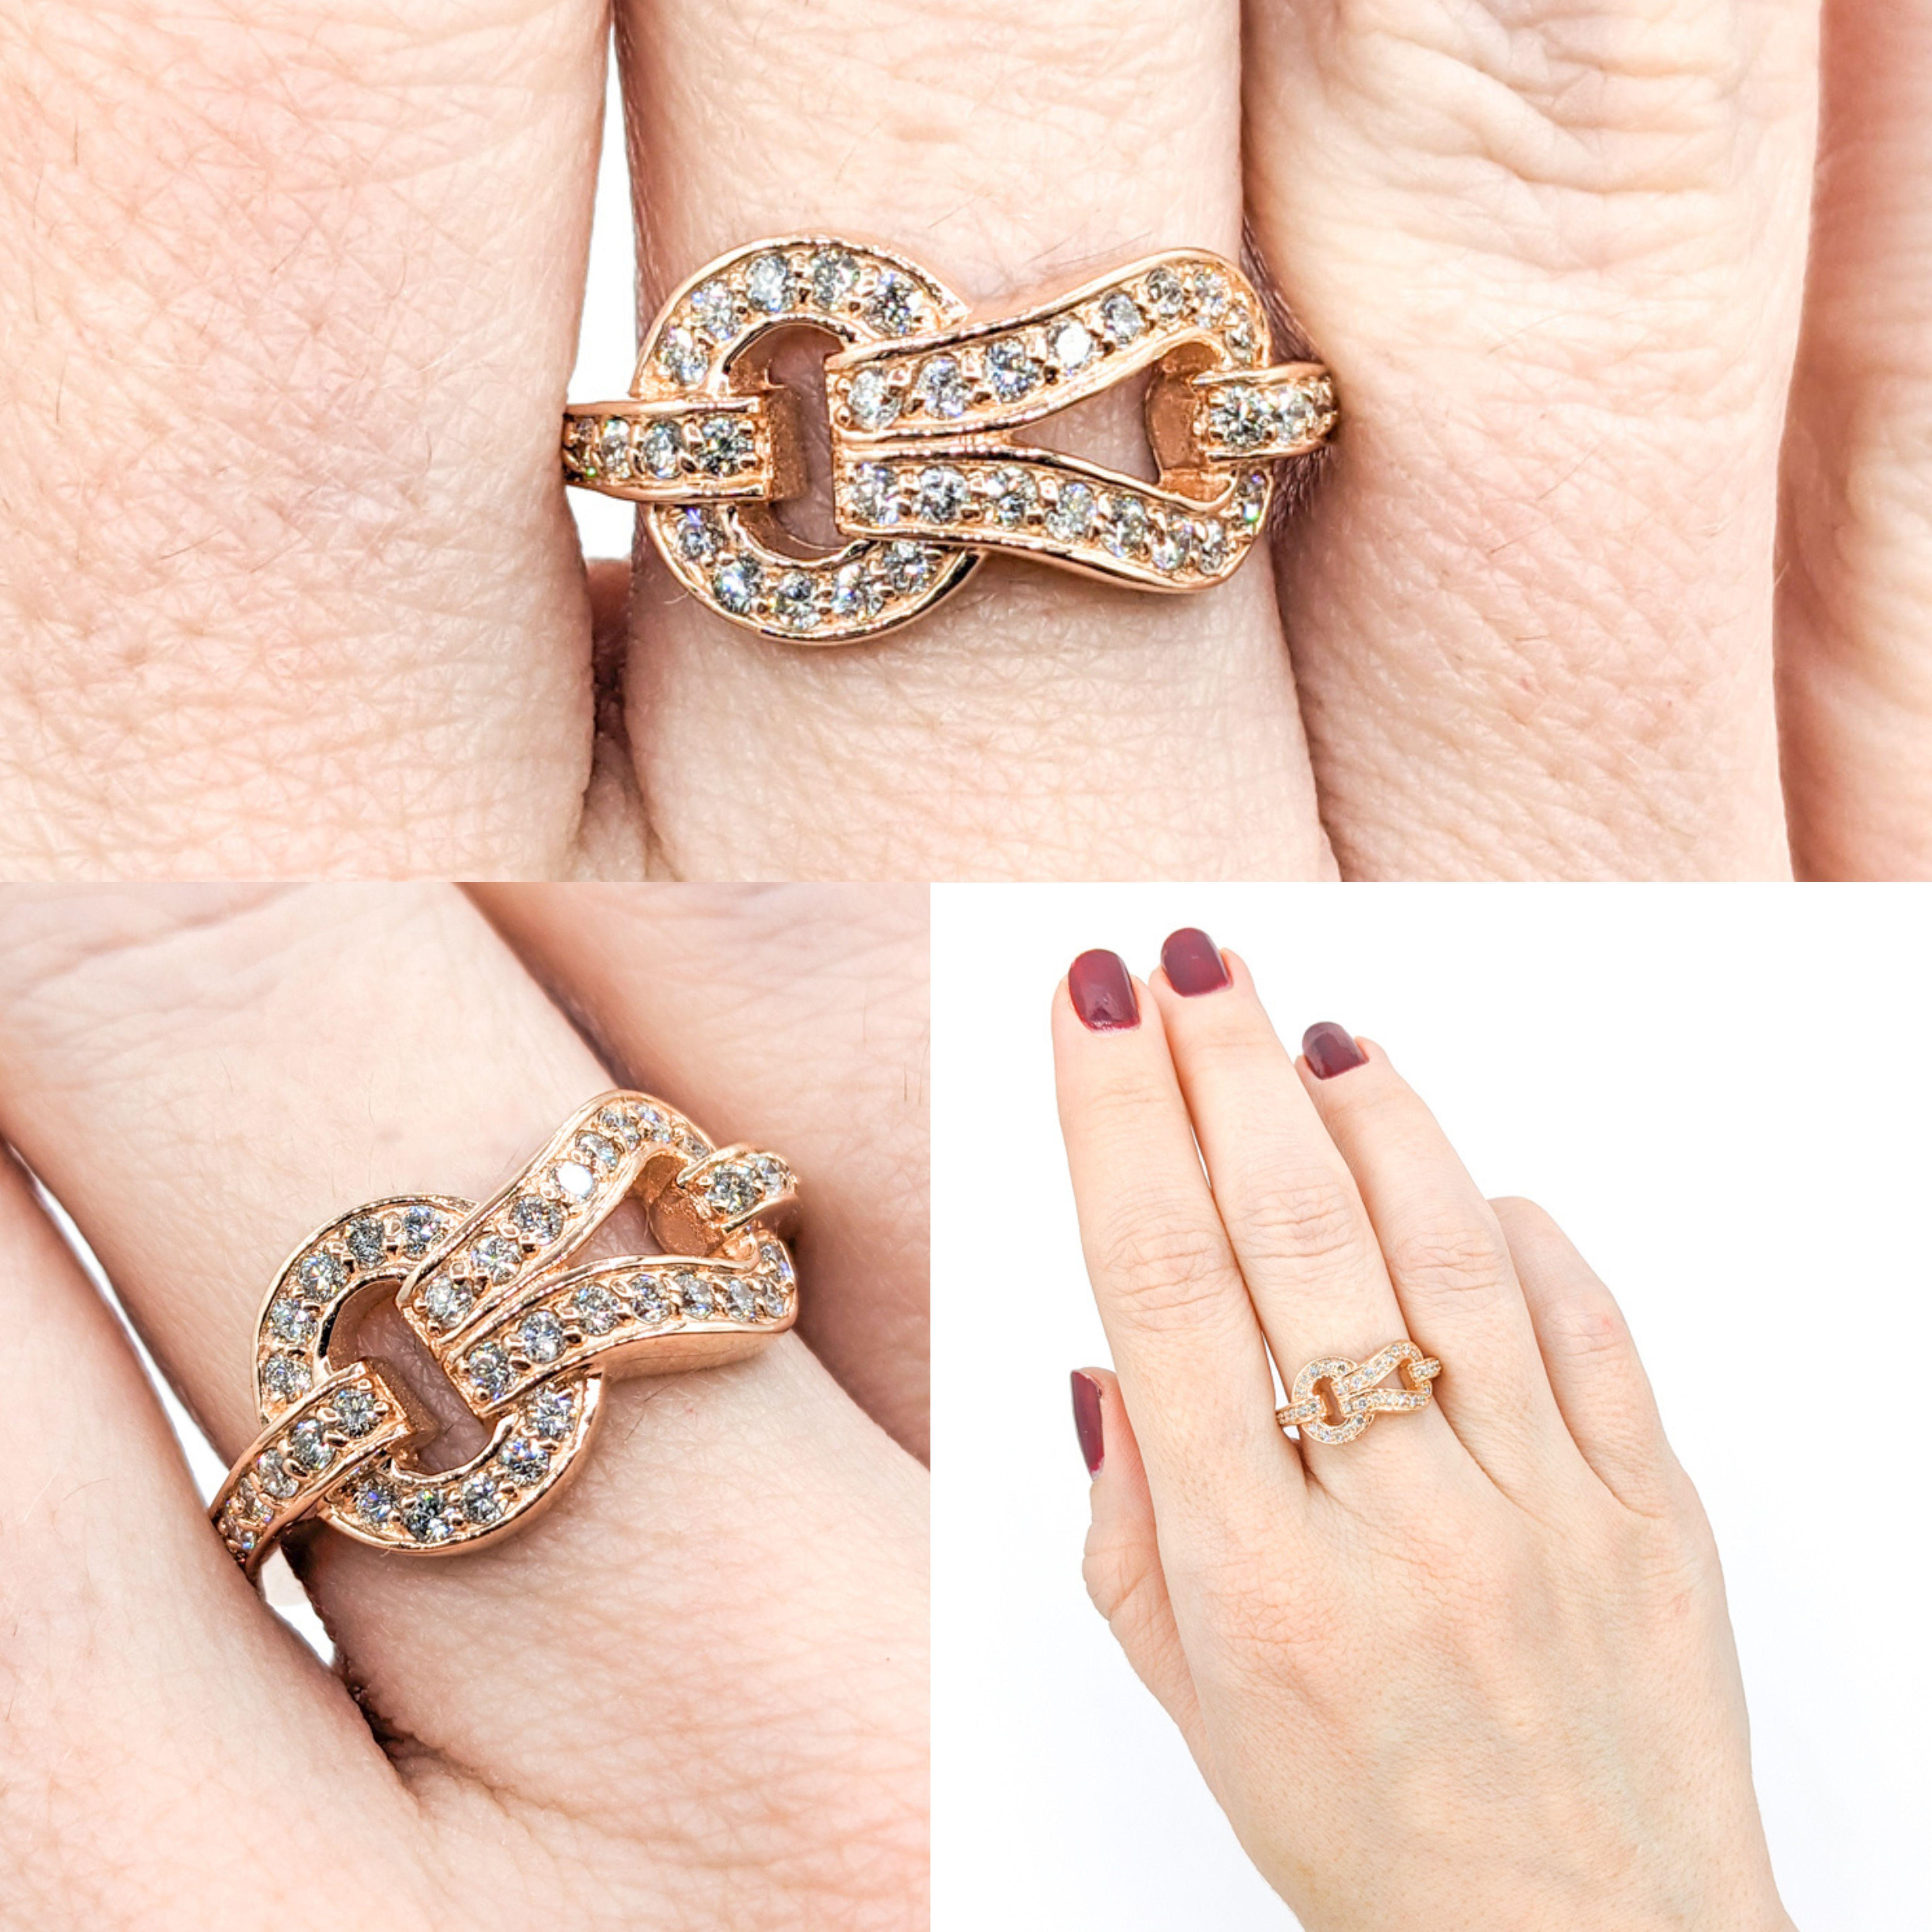 Diamond Knot Ring in Rose Gold

Introducing our exquisite Rose Gold Ring featuring a timeless diamond knot design. This stunning piece is skillfully crafted in 14k rose gold, providing a warm, romantic glow. At the forefront of its design, the ring